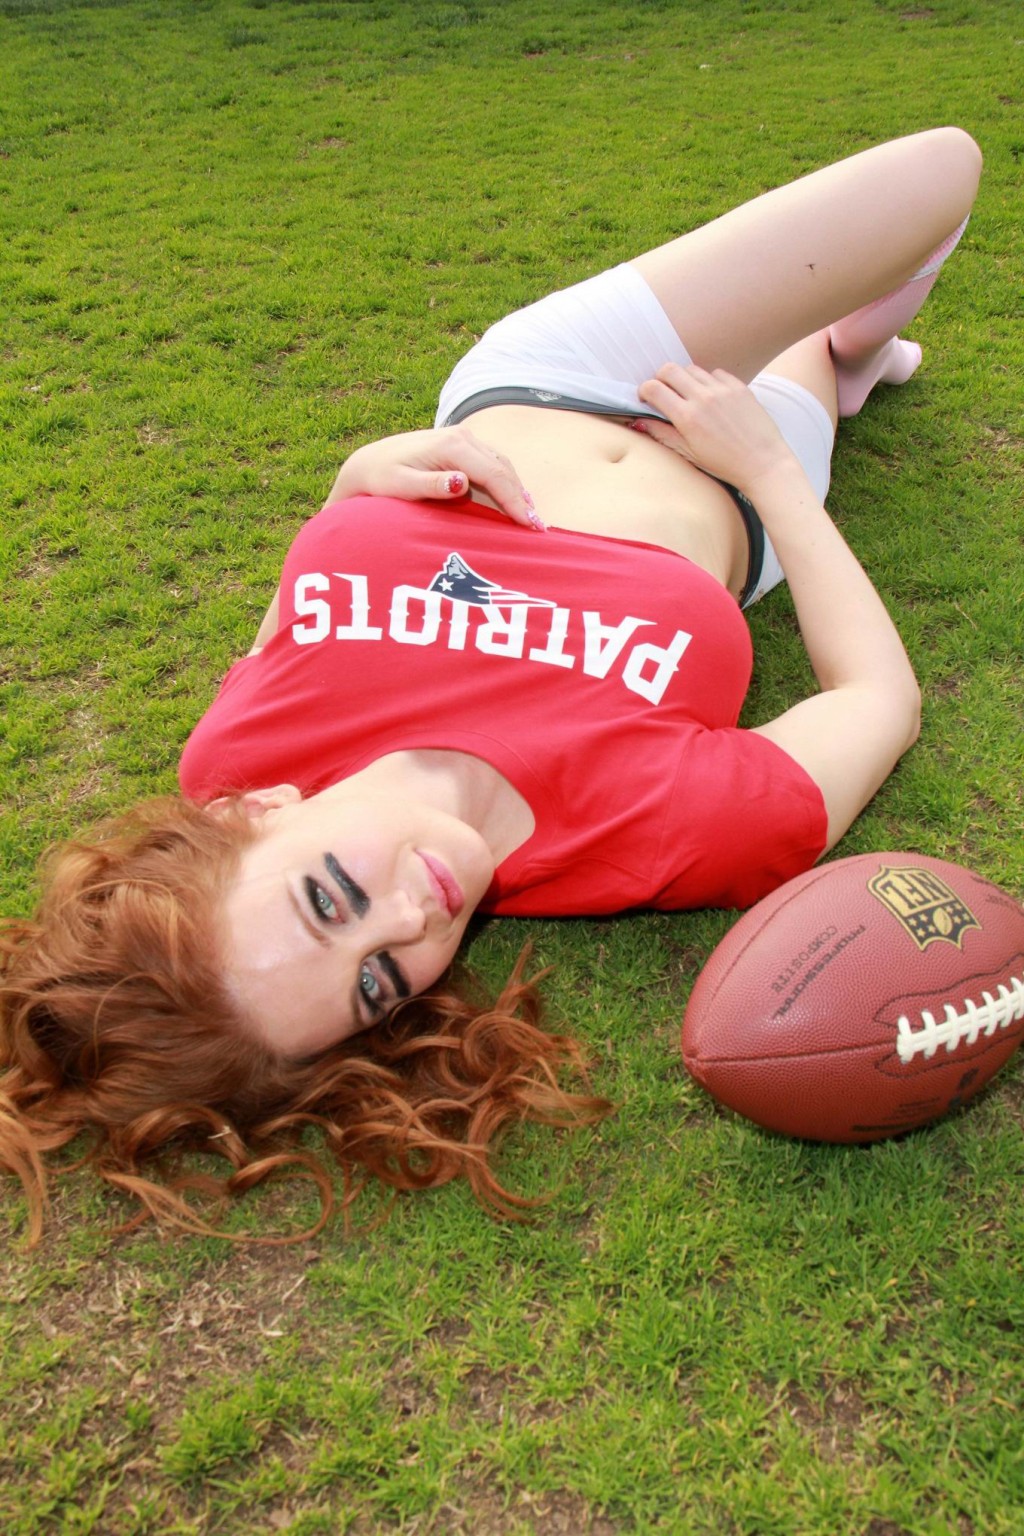 Maitland Ward showing underboob and pokies in red top and shorts at Super Bowl p #75174164